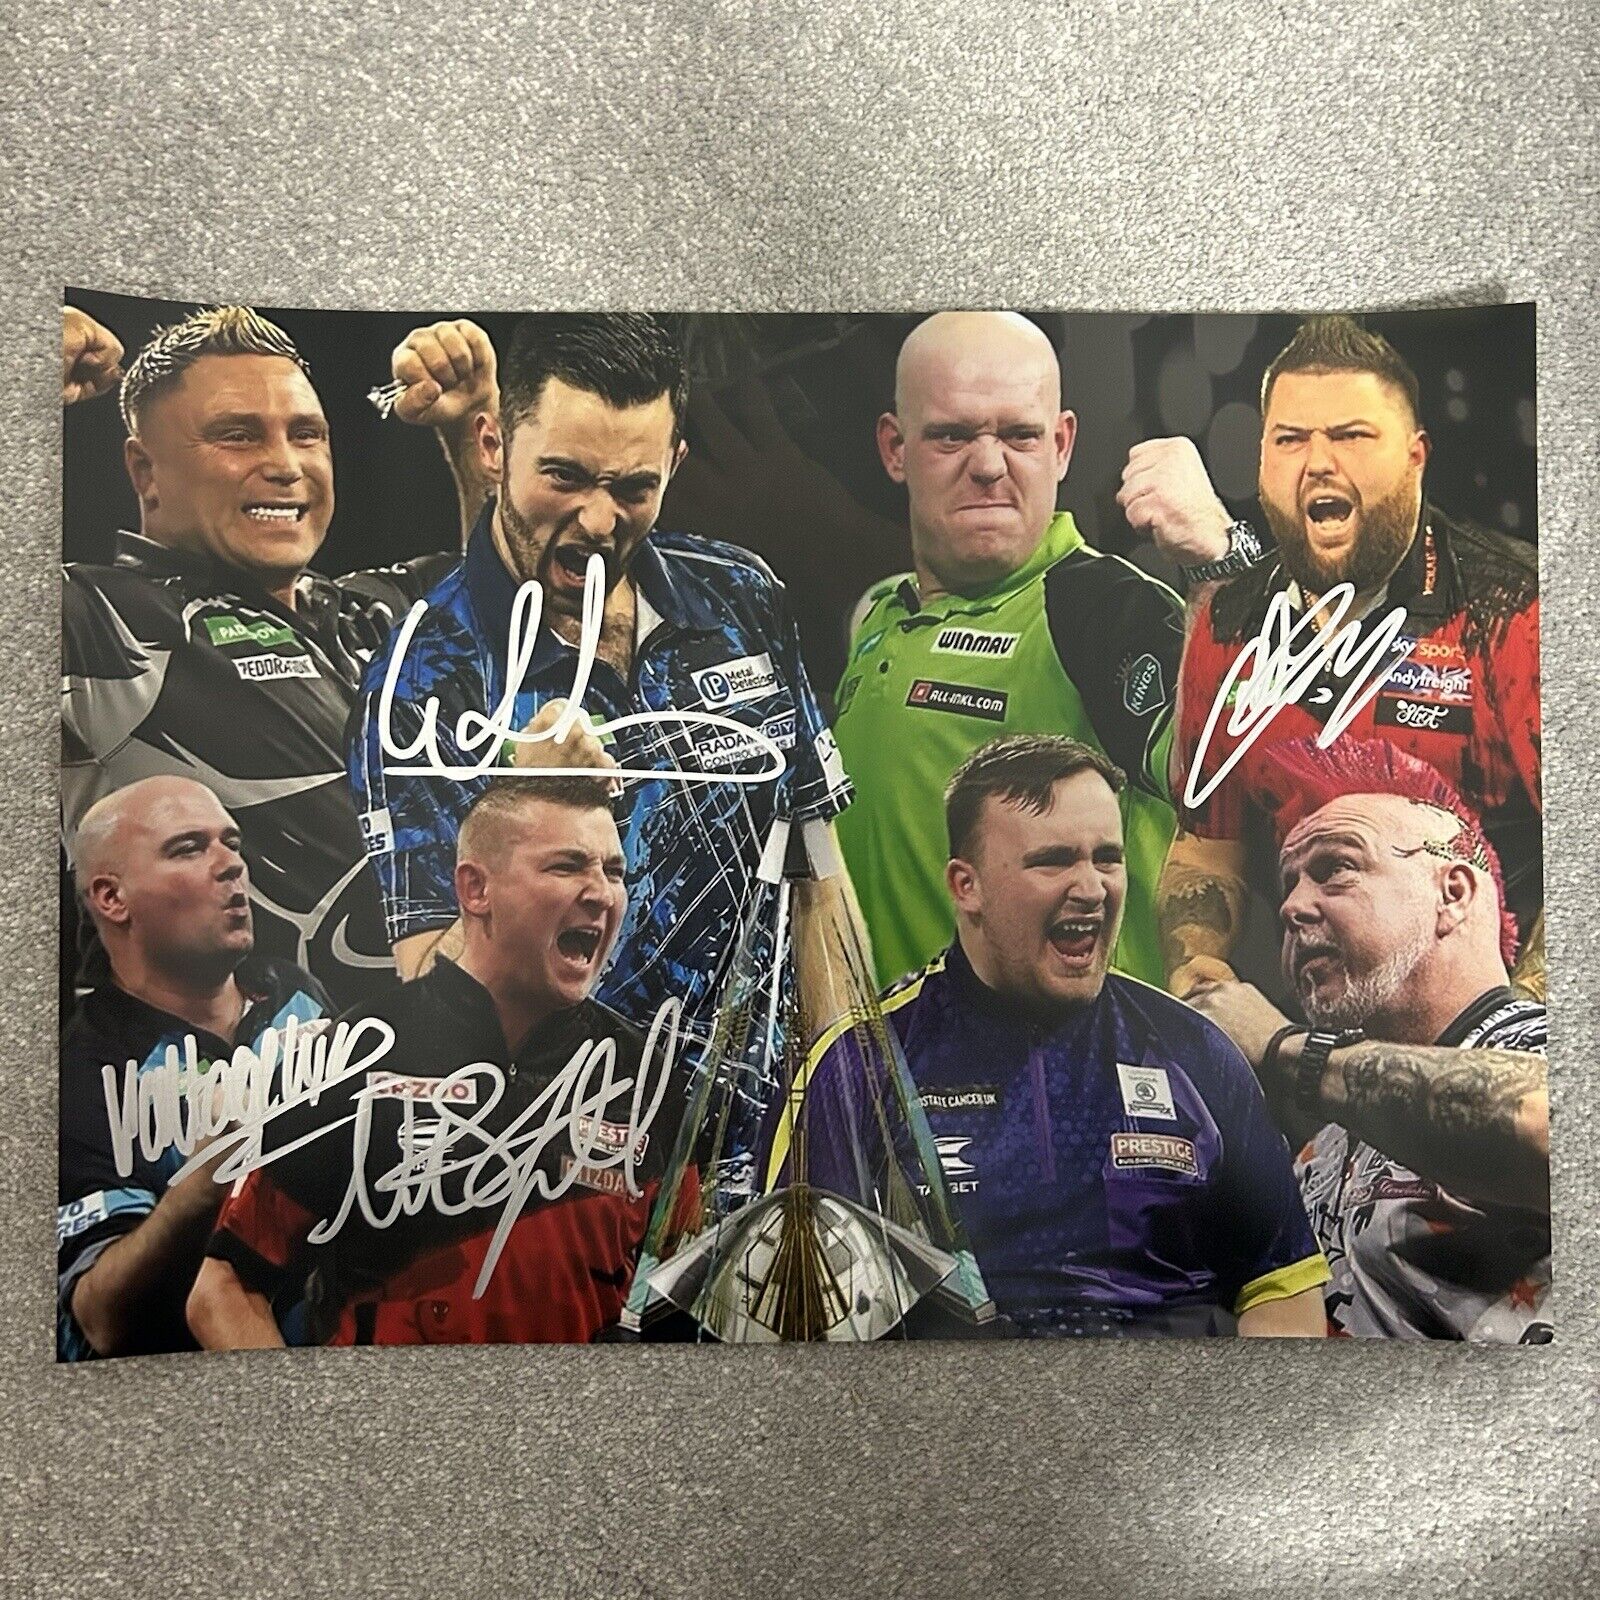 HAND SIGNED PREMIER LEAGUE DARTS A3 12x16” PHOTO with COA and PHOTO PROOF